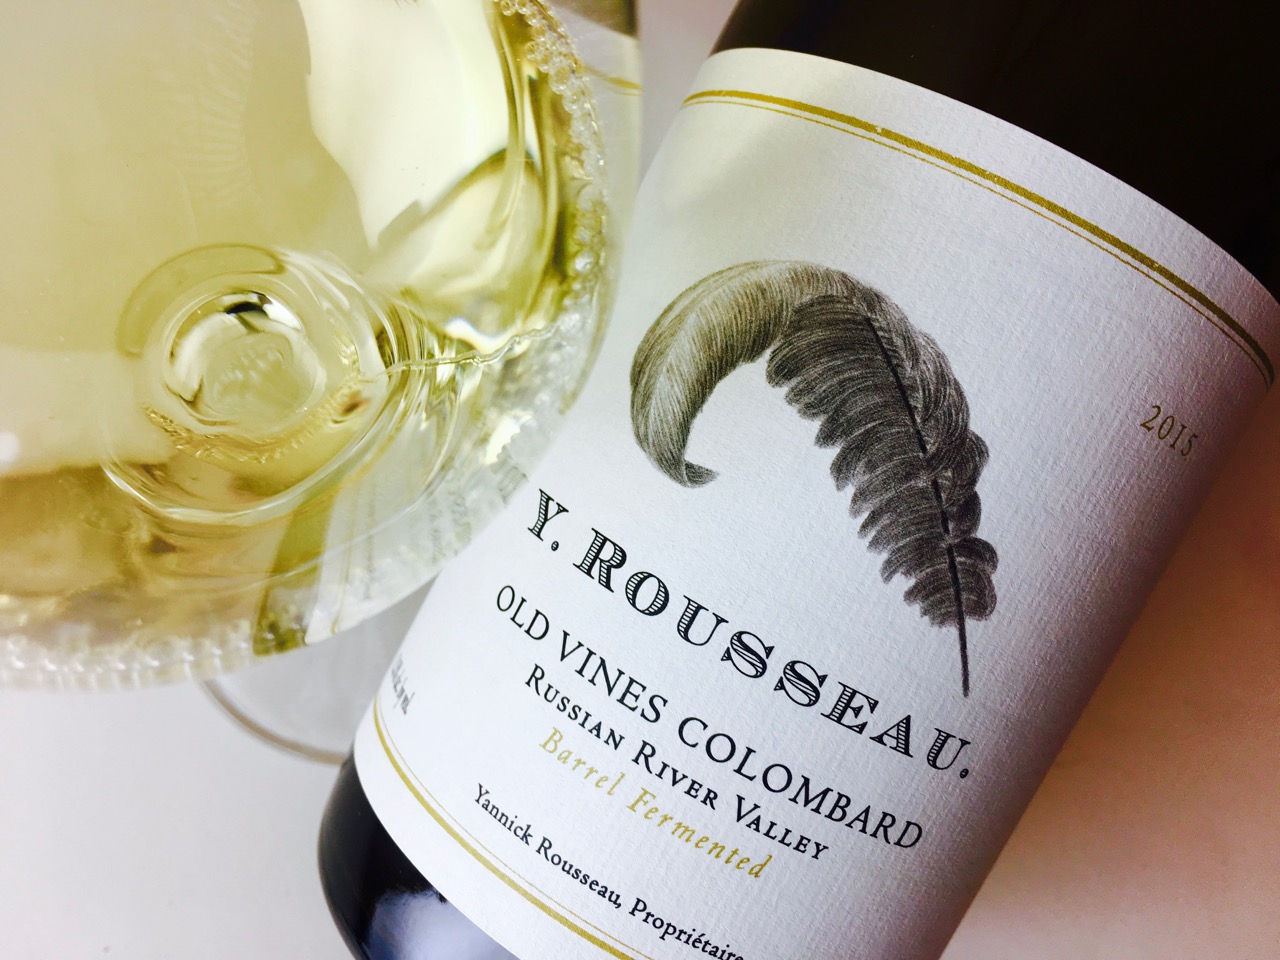 2015 Y. Rousseau Old Vines Colombard Russian River Valley, Sonoma County